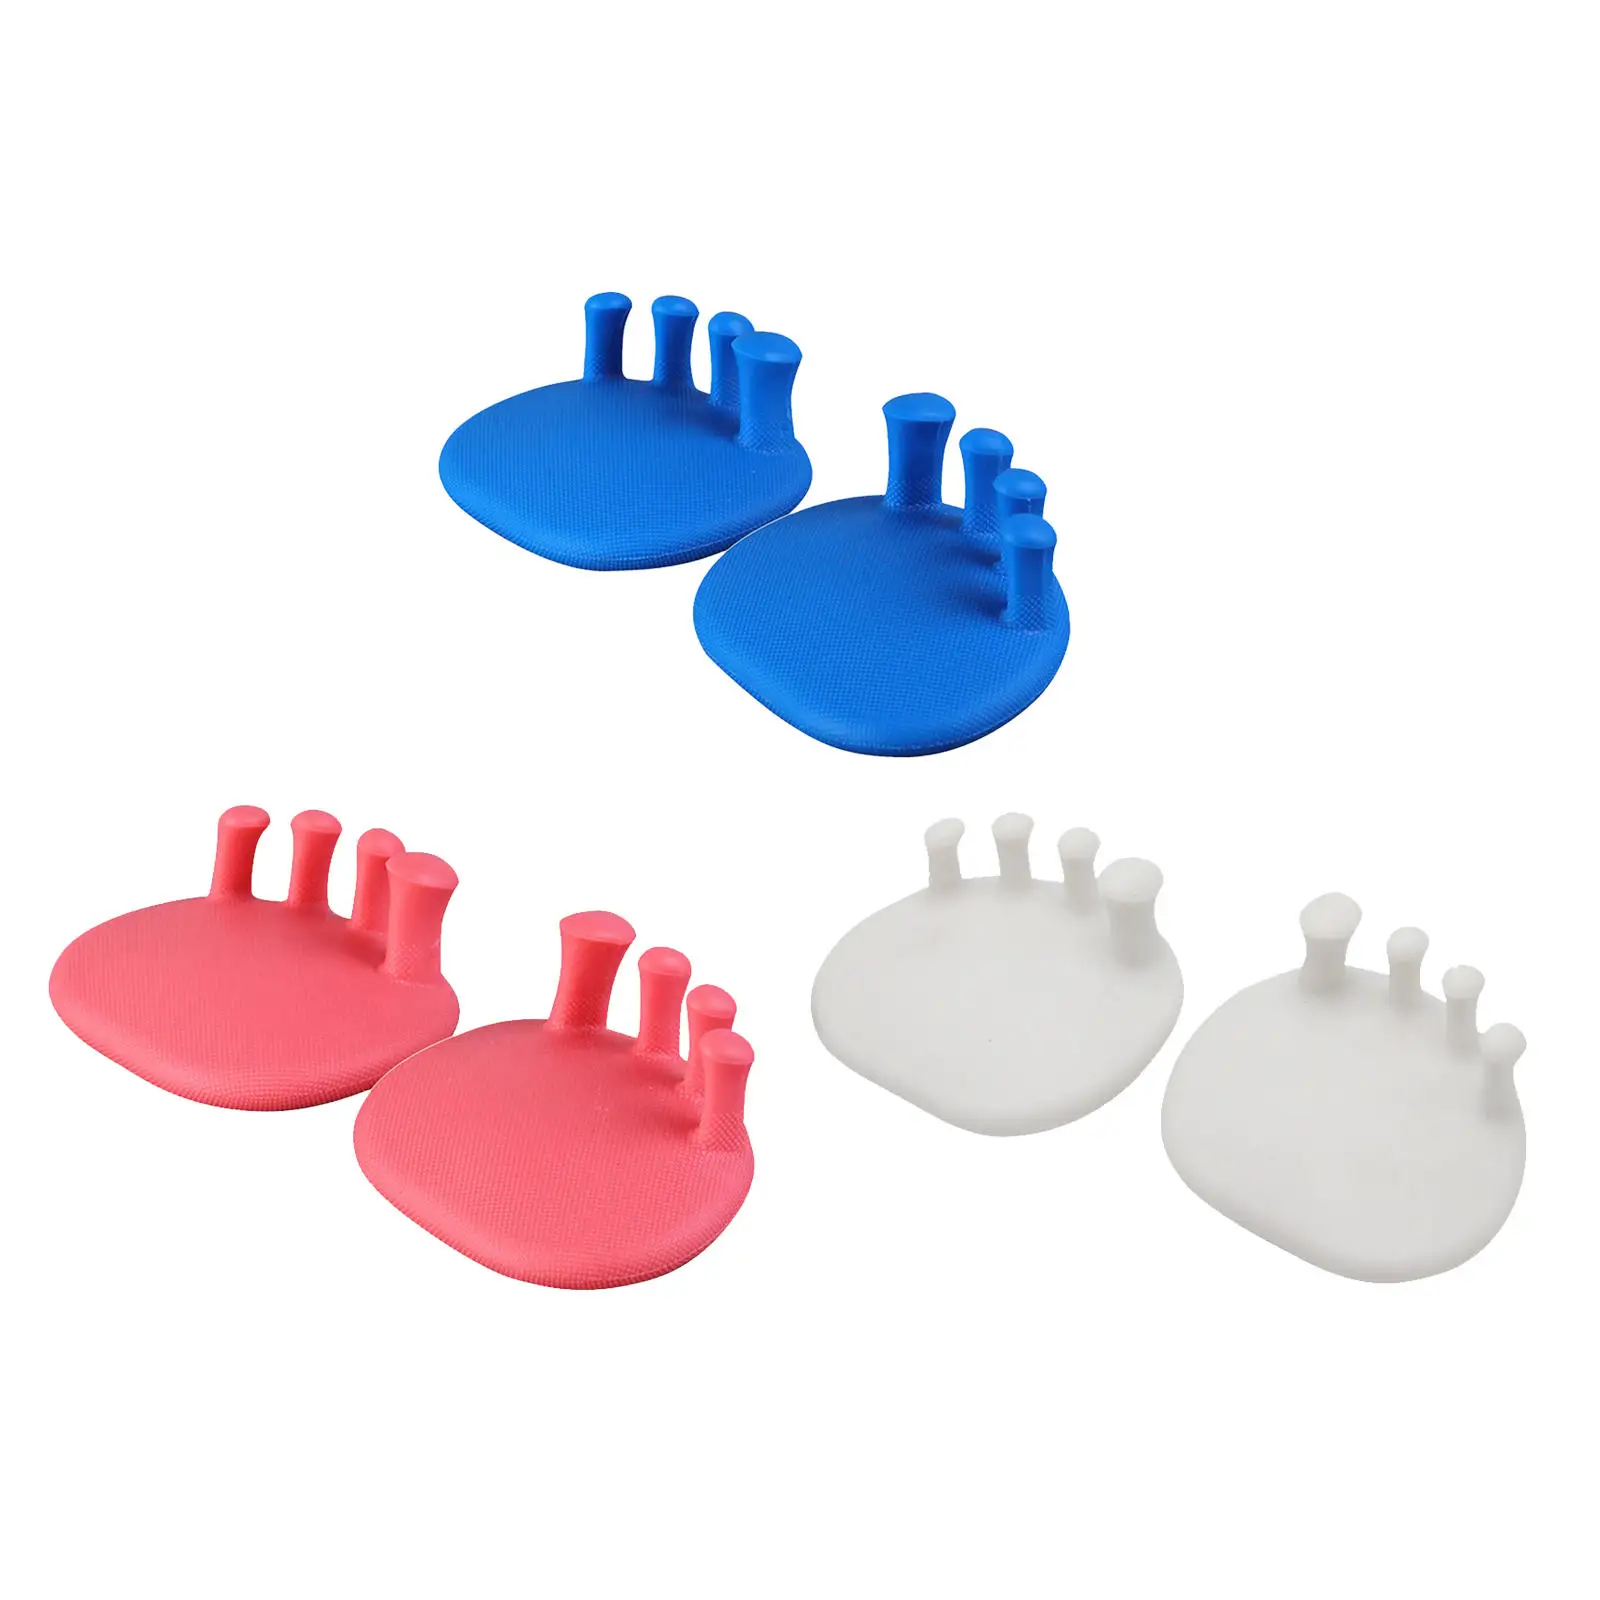 1 Pair Bunion Corrector Toes Spacer, Universal Size, for Correct Bunions Overlapping Toes Men Women